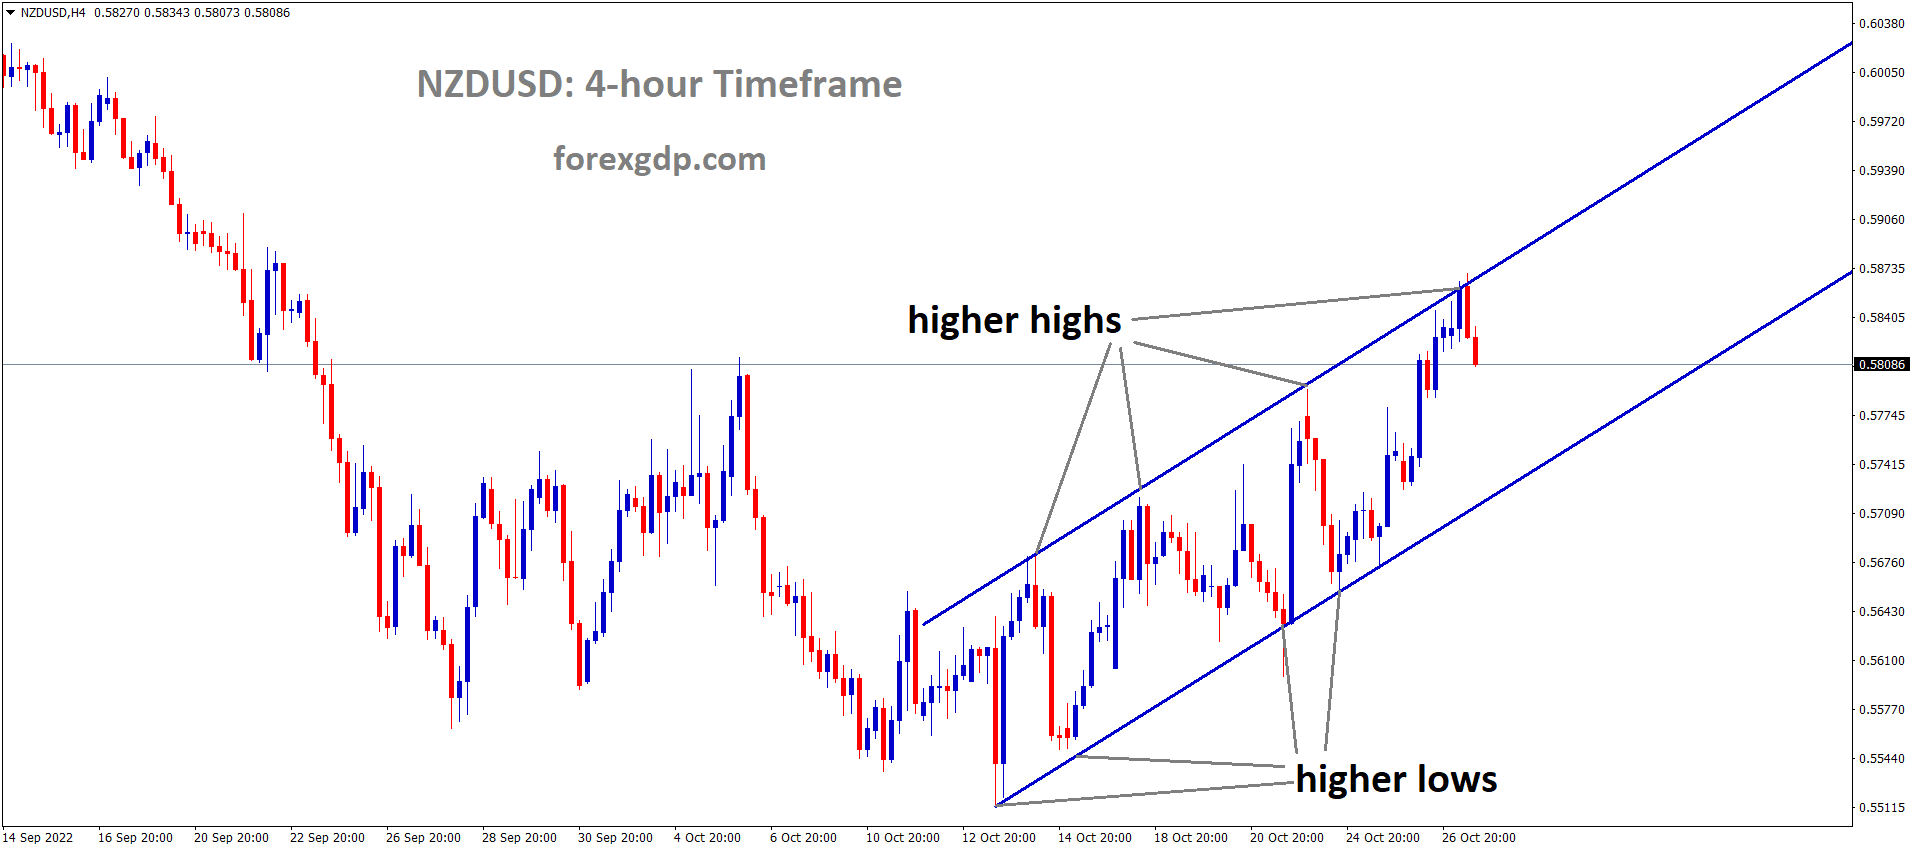 NZDUSD is moving in an Ascending channel and the market has fallen from the higher high area of the channel 1